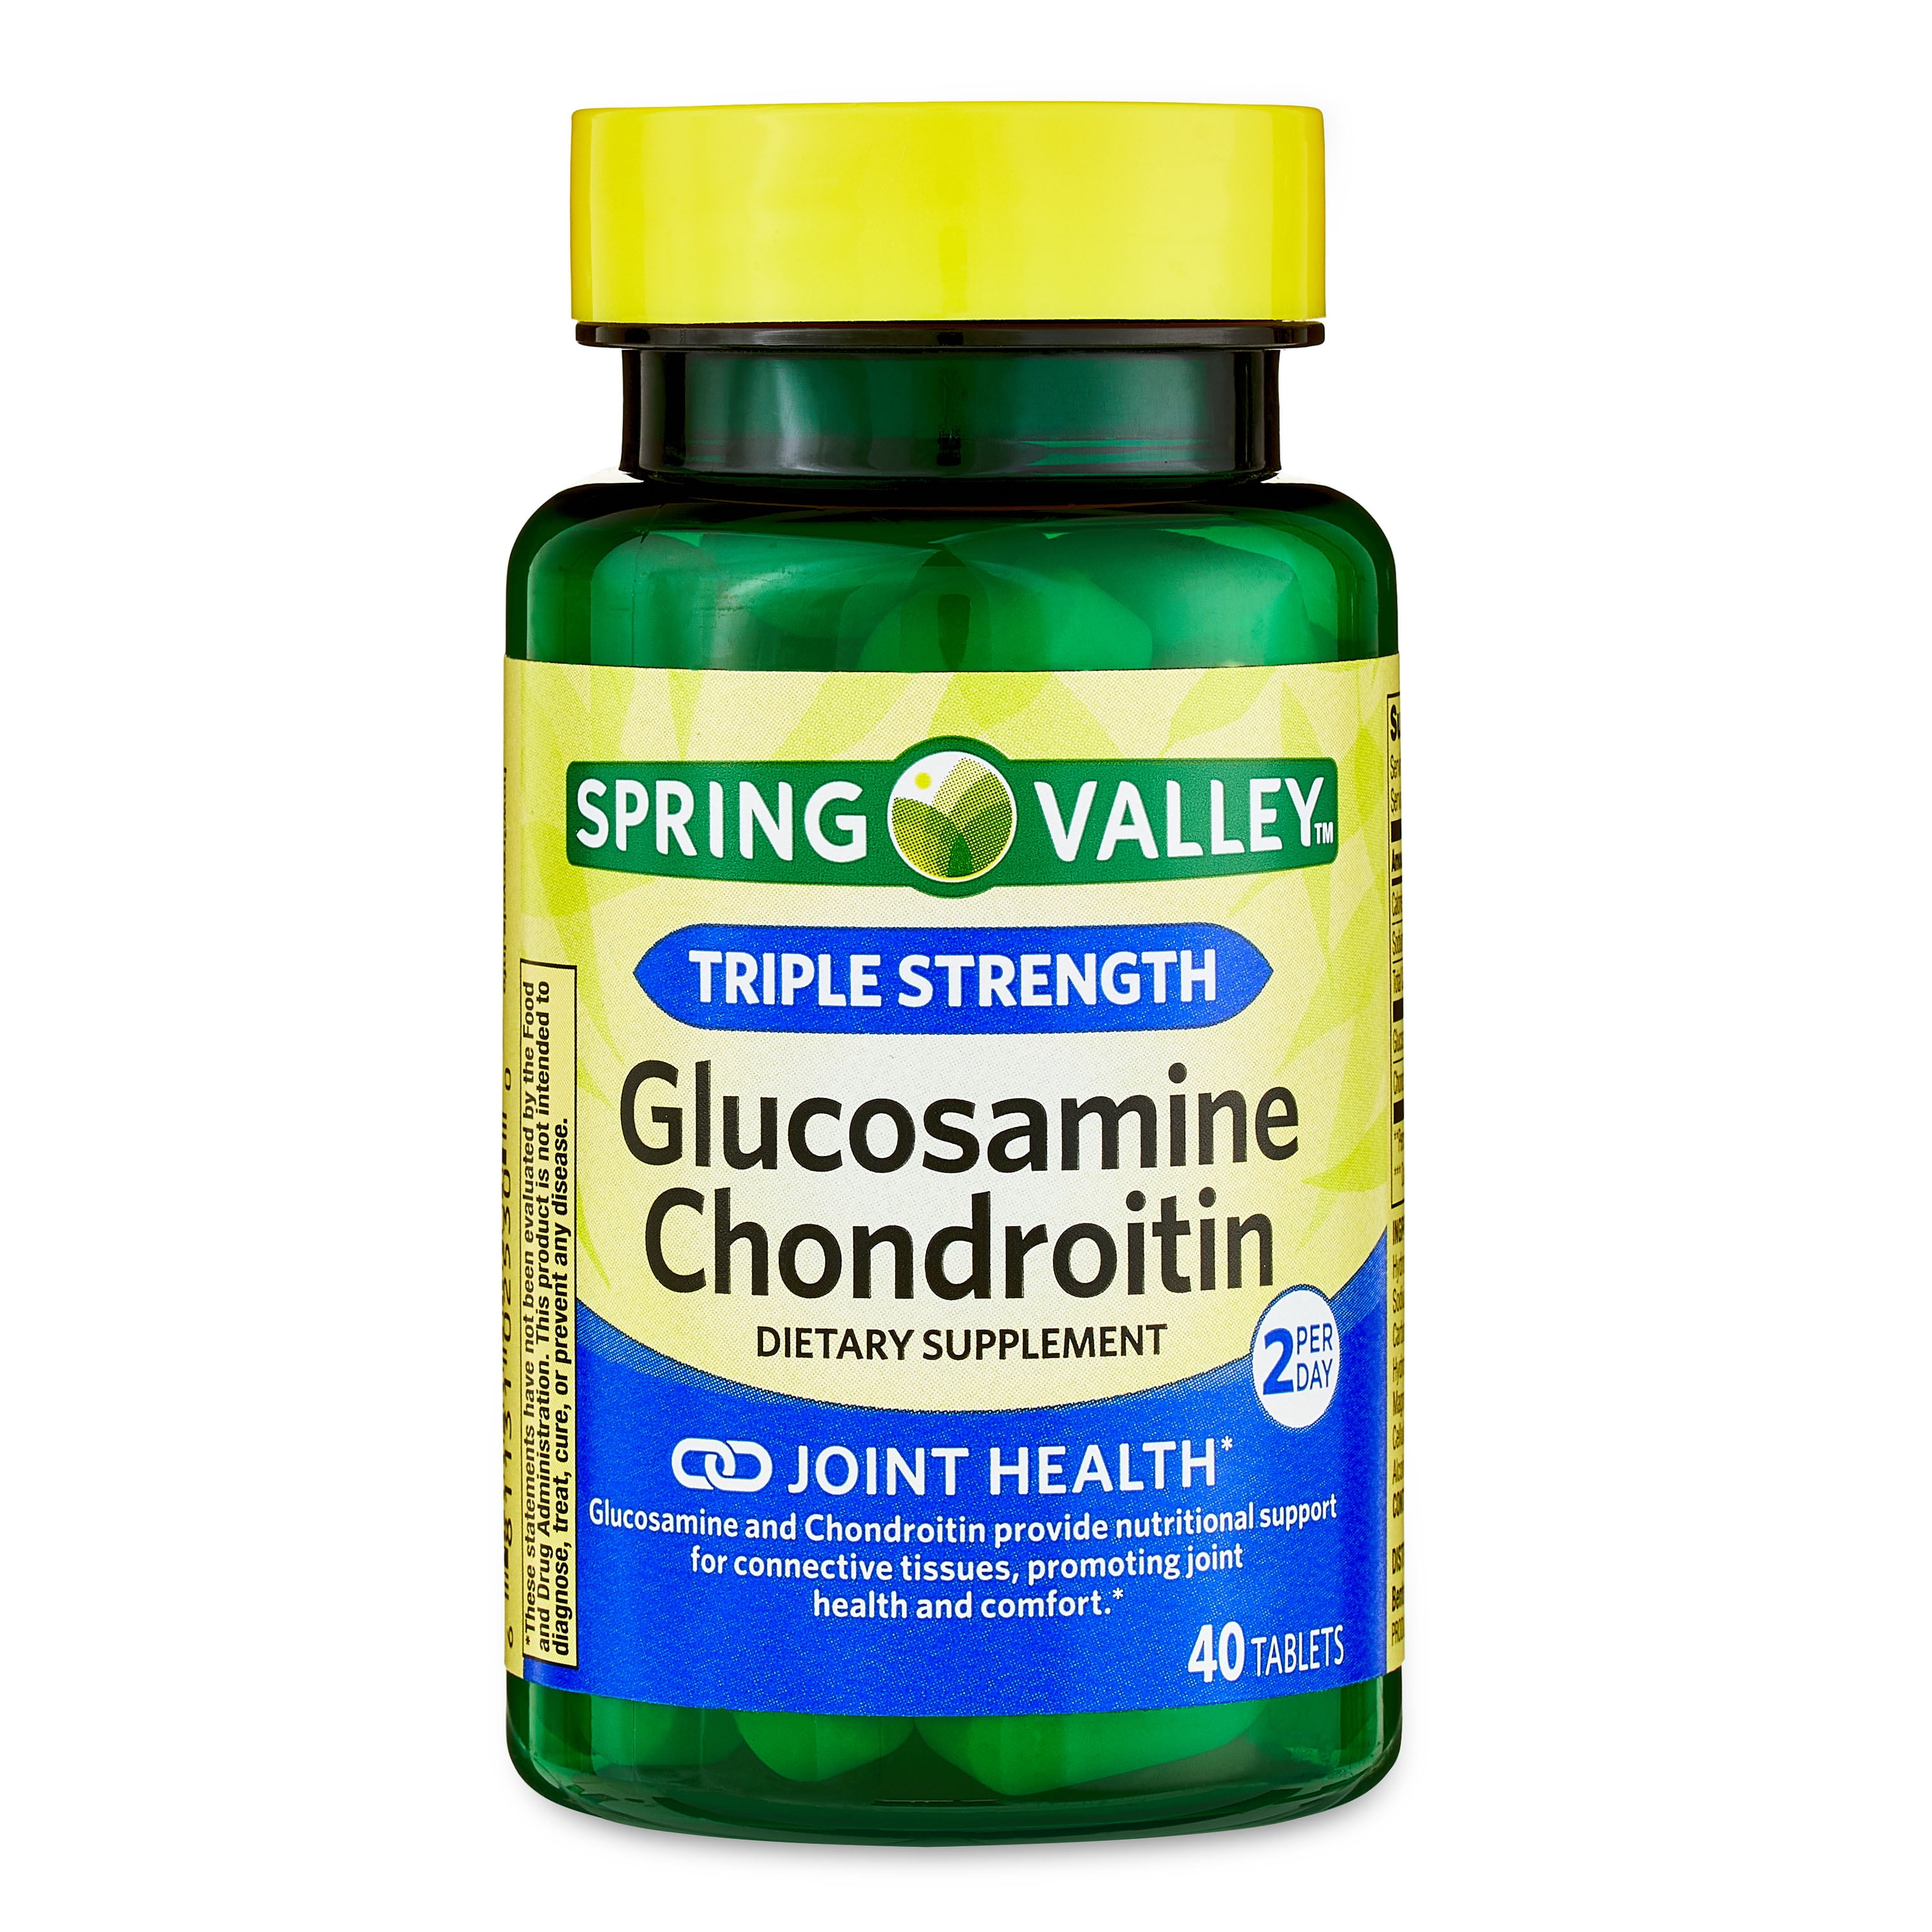 Spring Valley Triple Strength Glucosamine Chondroitin Tablets Dietary Supplement, 40 Count